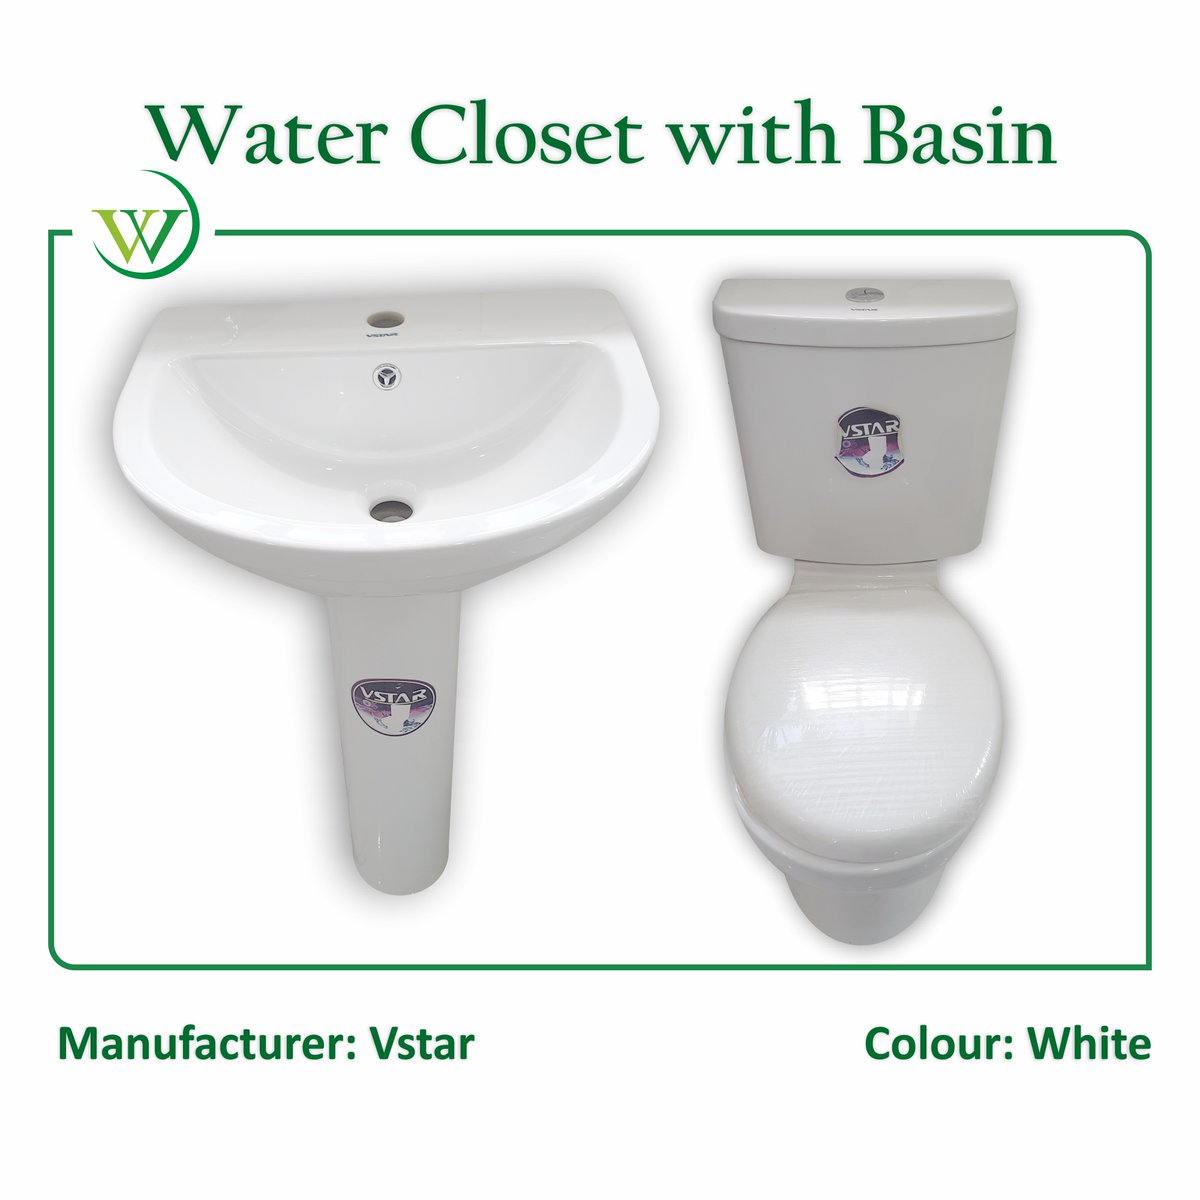 The VStar Water Closet and Wash Basin in White Colour is available as seen.

It can be sold separately for single or bulk purchase. Give us a call on 08068520808 or 08184463235.  

#wutarickstore #toilet #washhandbasin #washbasin #vstar #watercloset #wcdistributor #wcseller